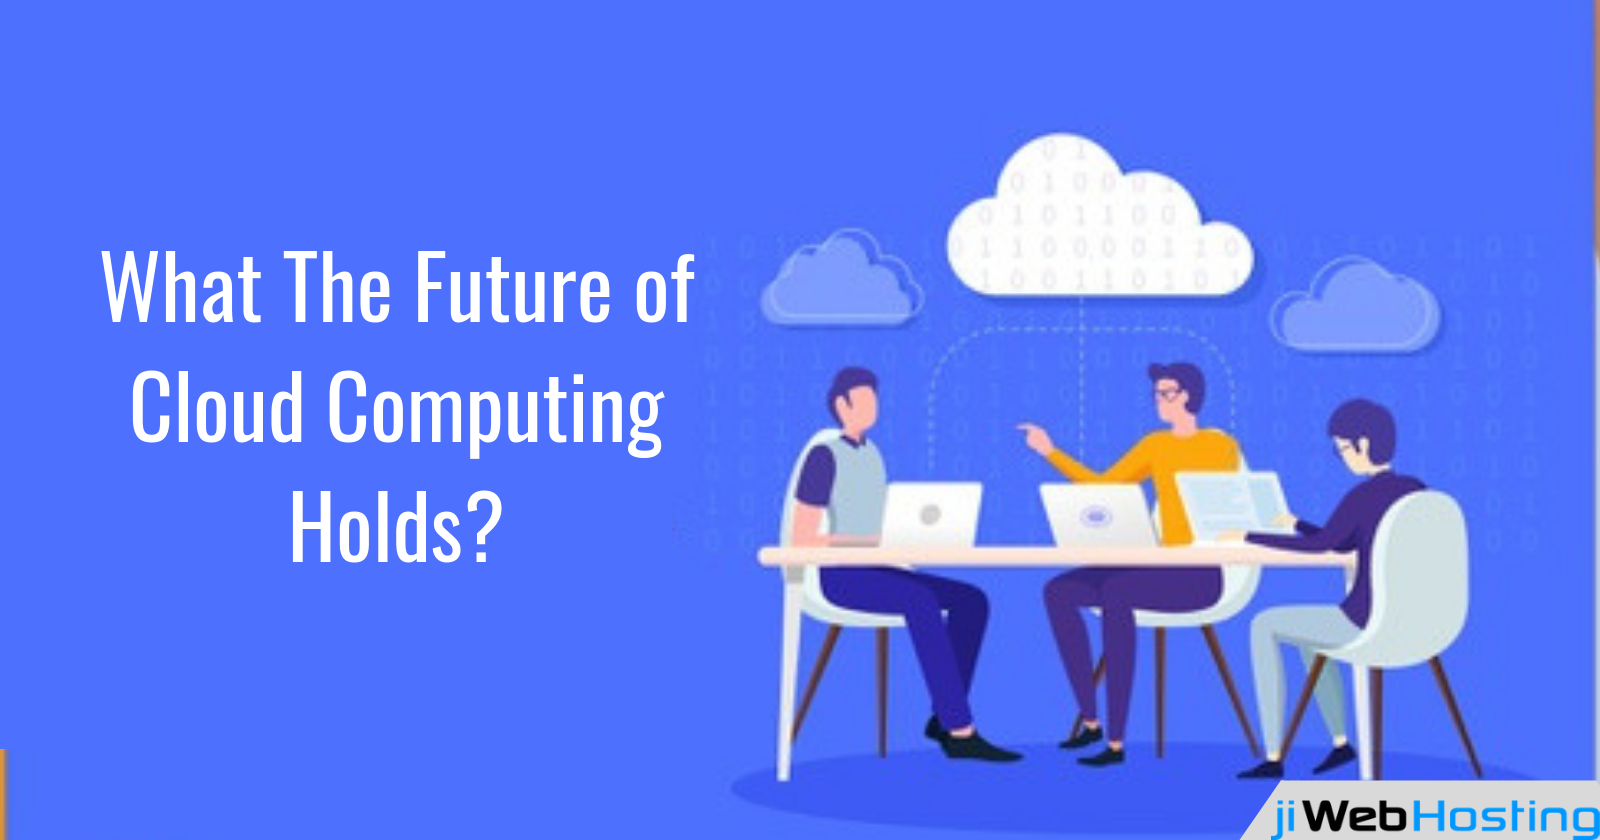 What The Future of Cloud Computing Holds?